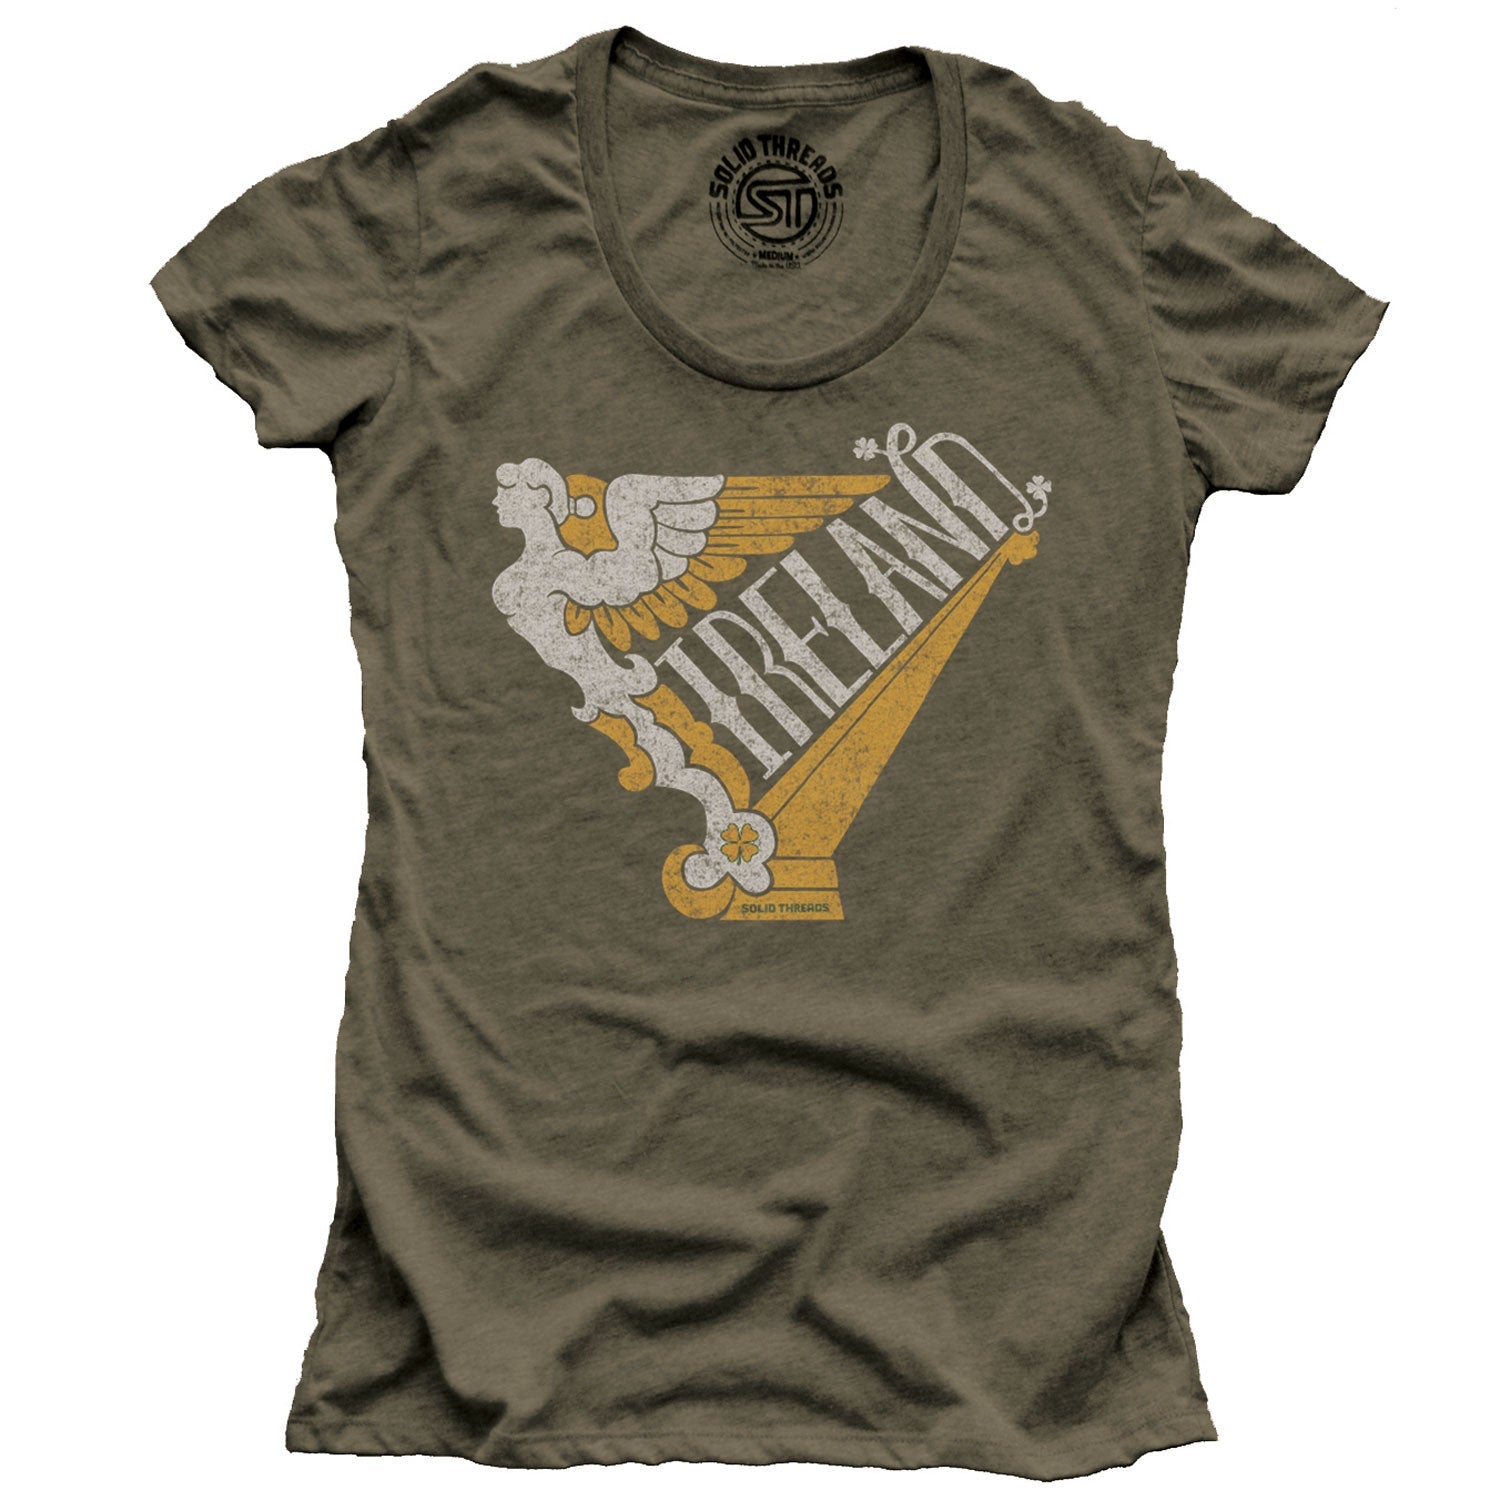 Women's Ireland Harp Cool Music Graphic T-Shirt | Vintage St Paddy's Day Tee | Solid Threads